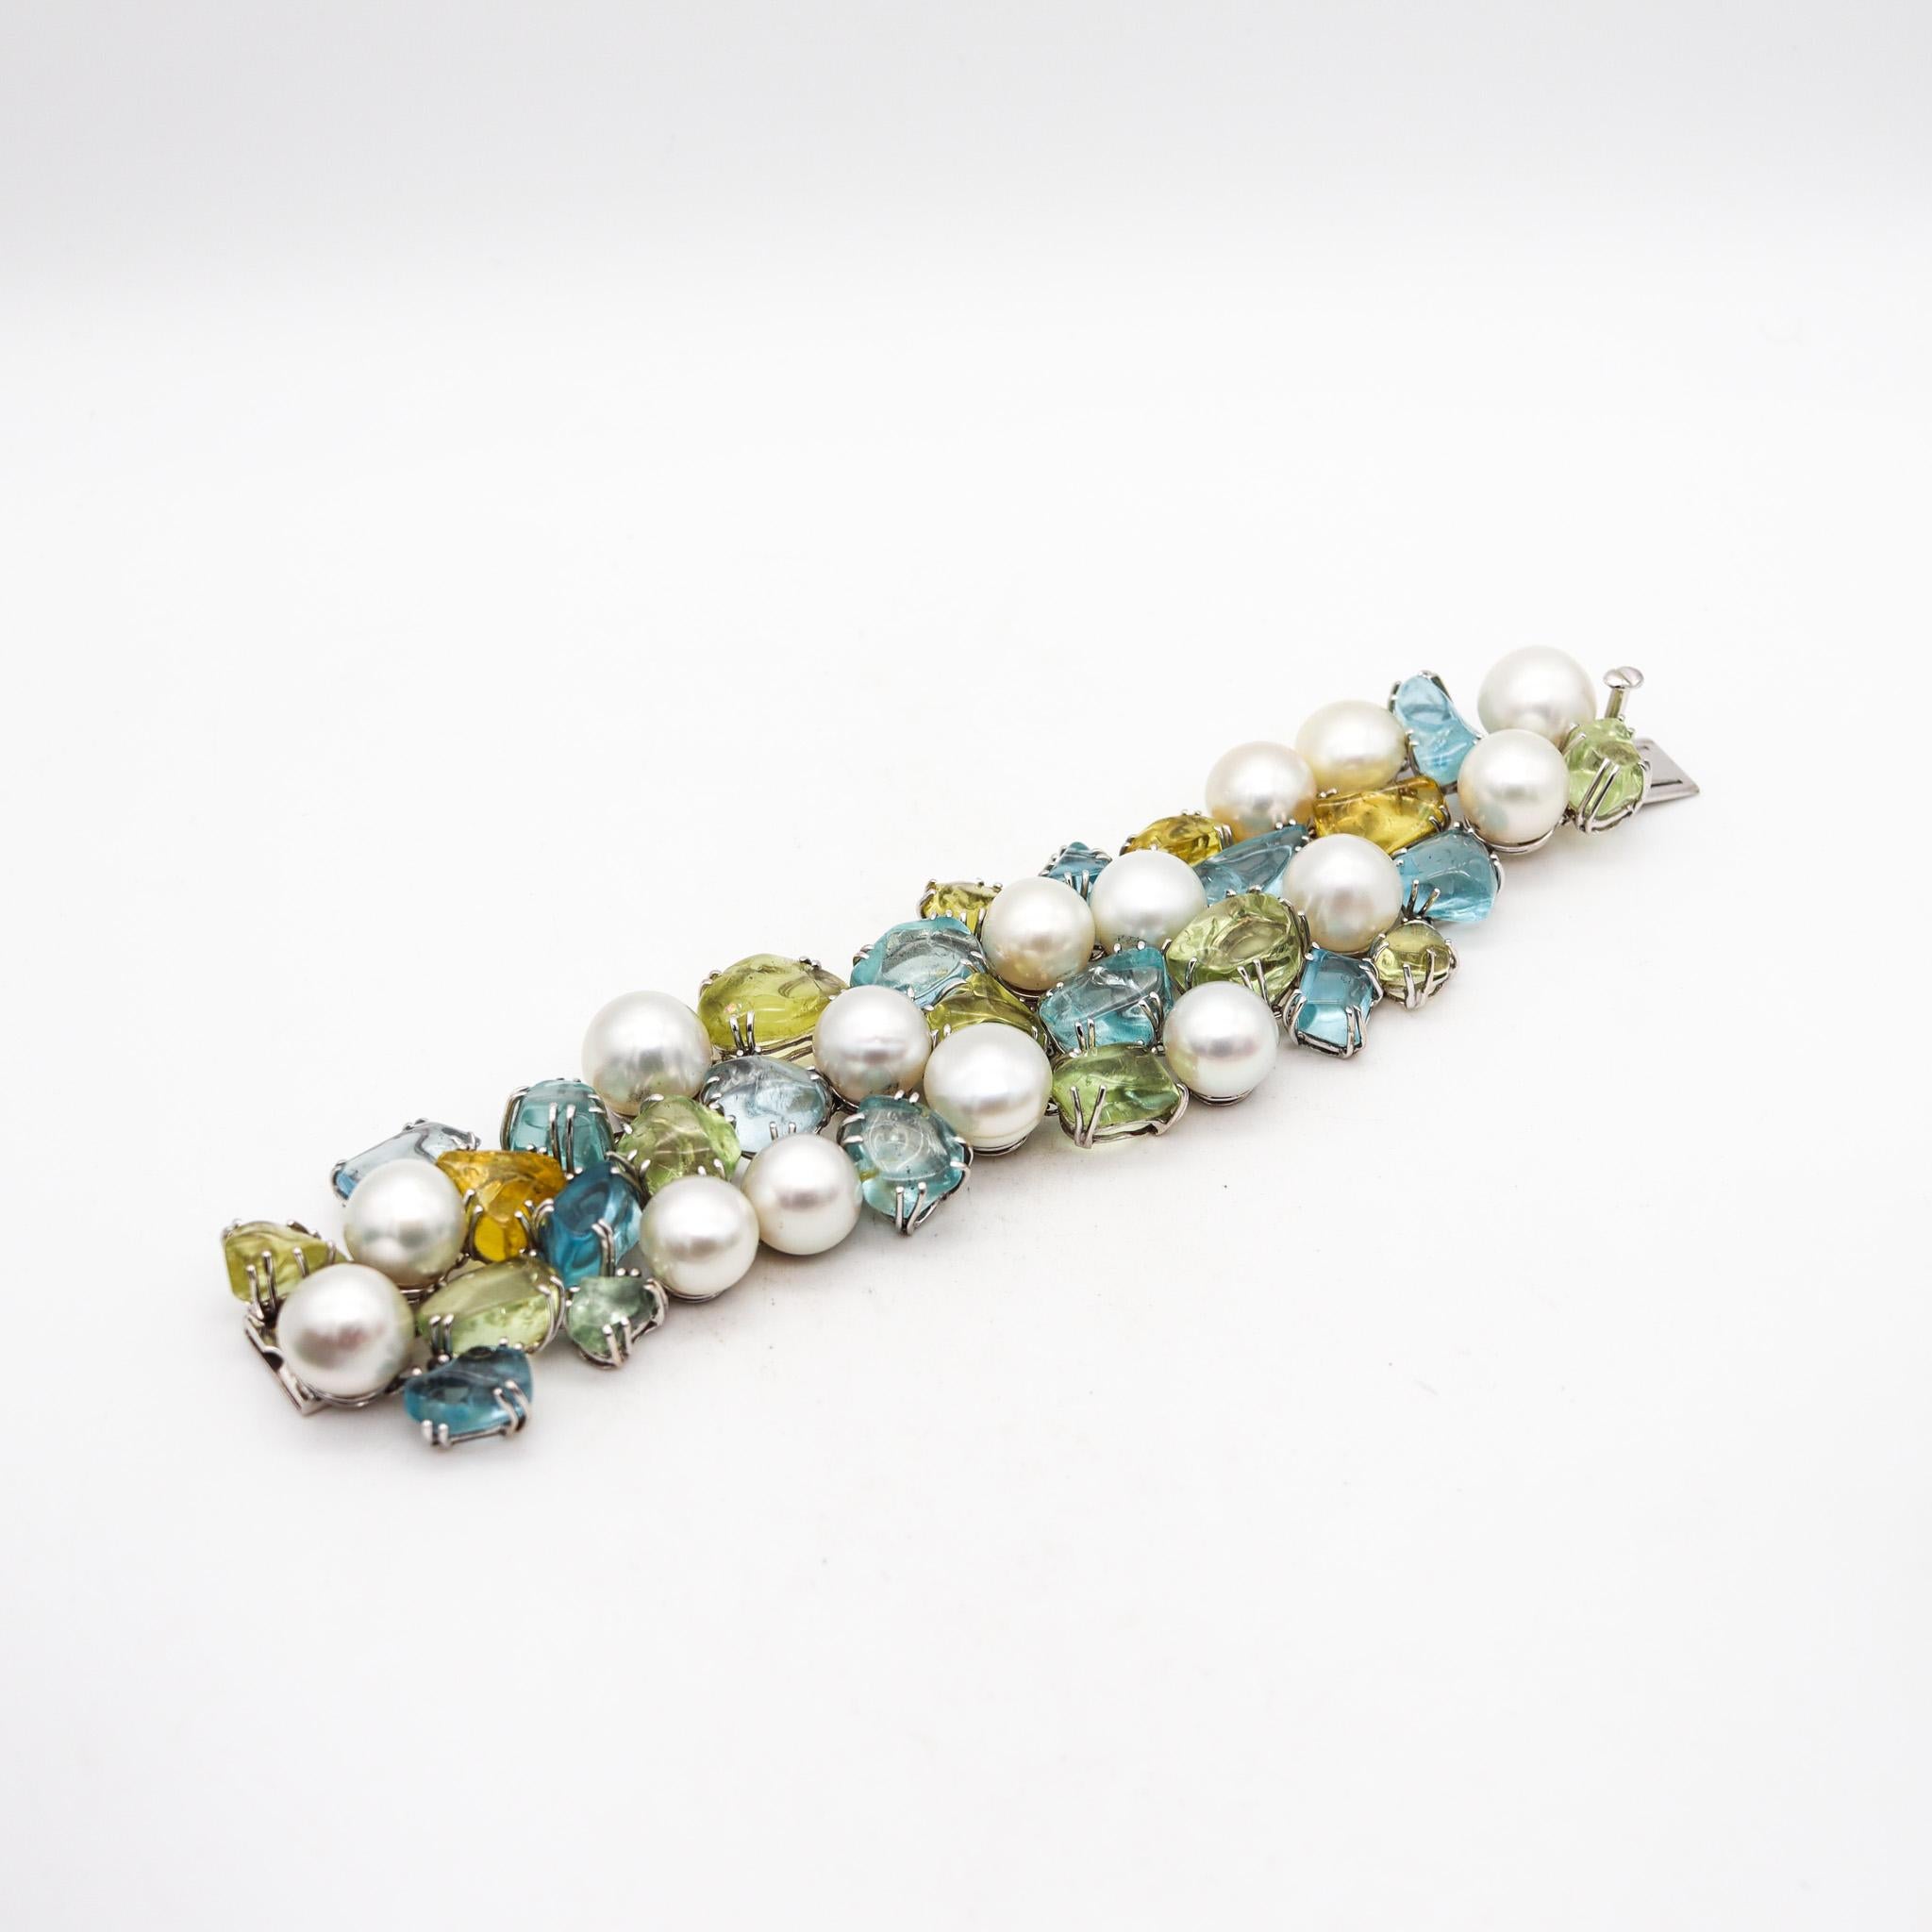 Modernist Salavetti Pearls Bracelet In 18Kt White Gold With 108 Ctw Aquamarines And Beryl For Sale